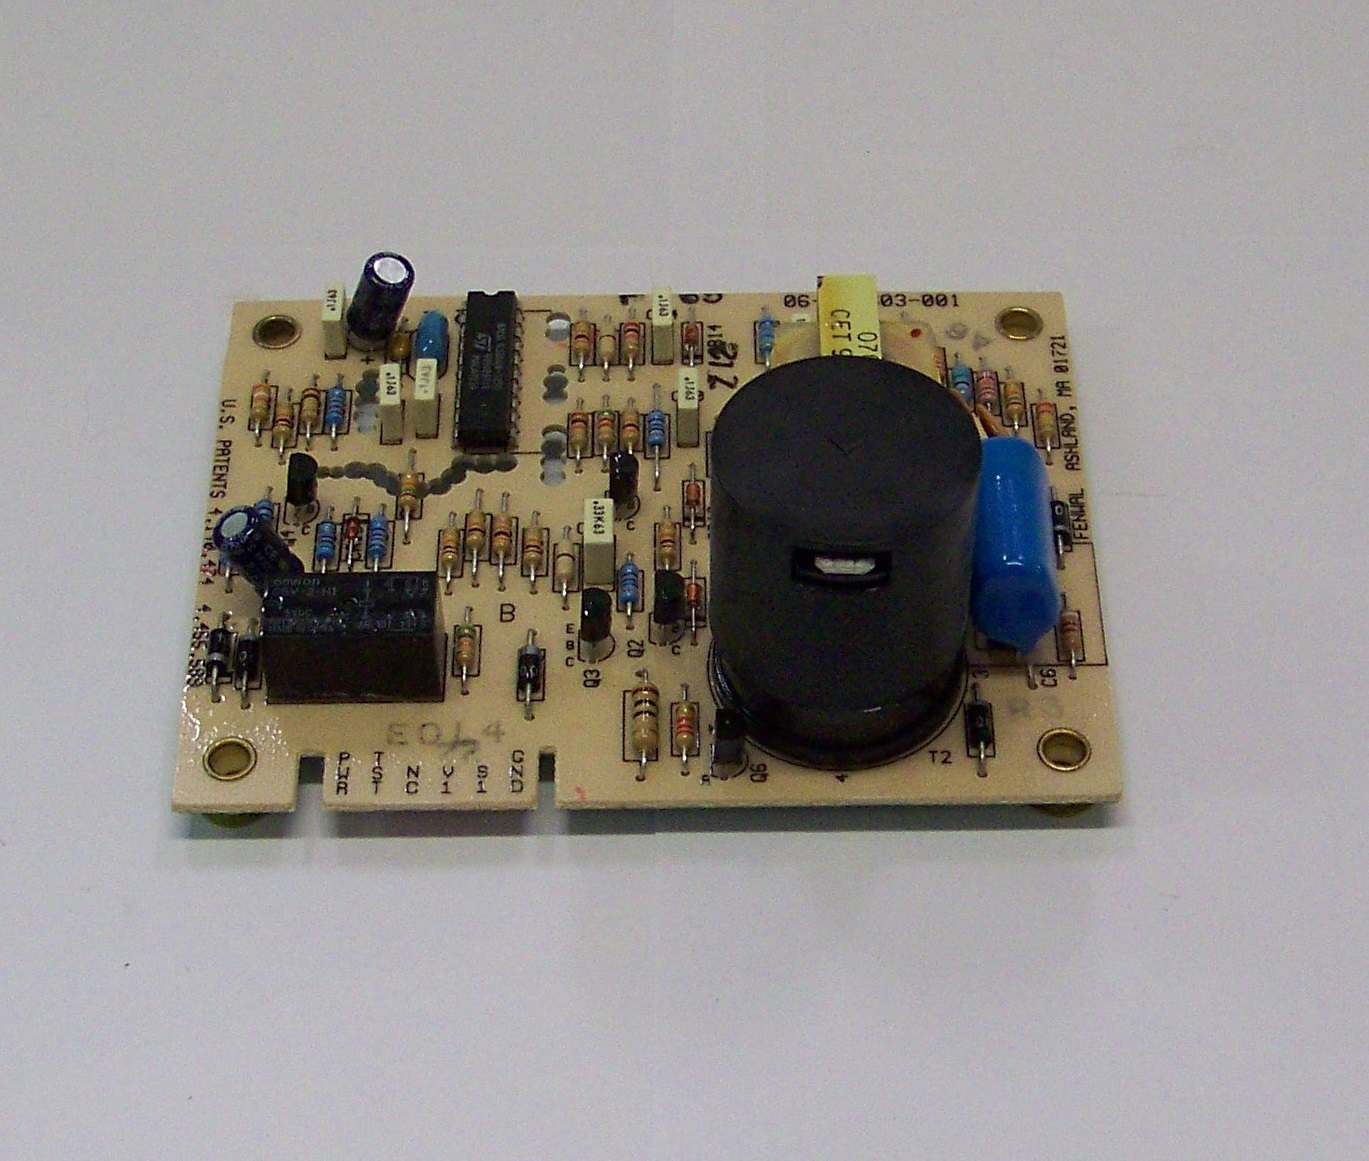 This a thumbnail of Suburban Ignition Control Circuit Board #520741